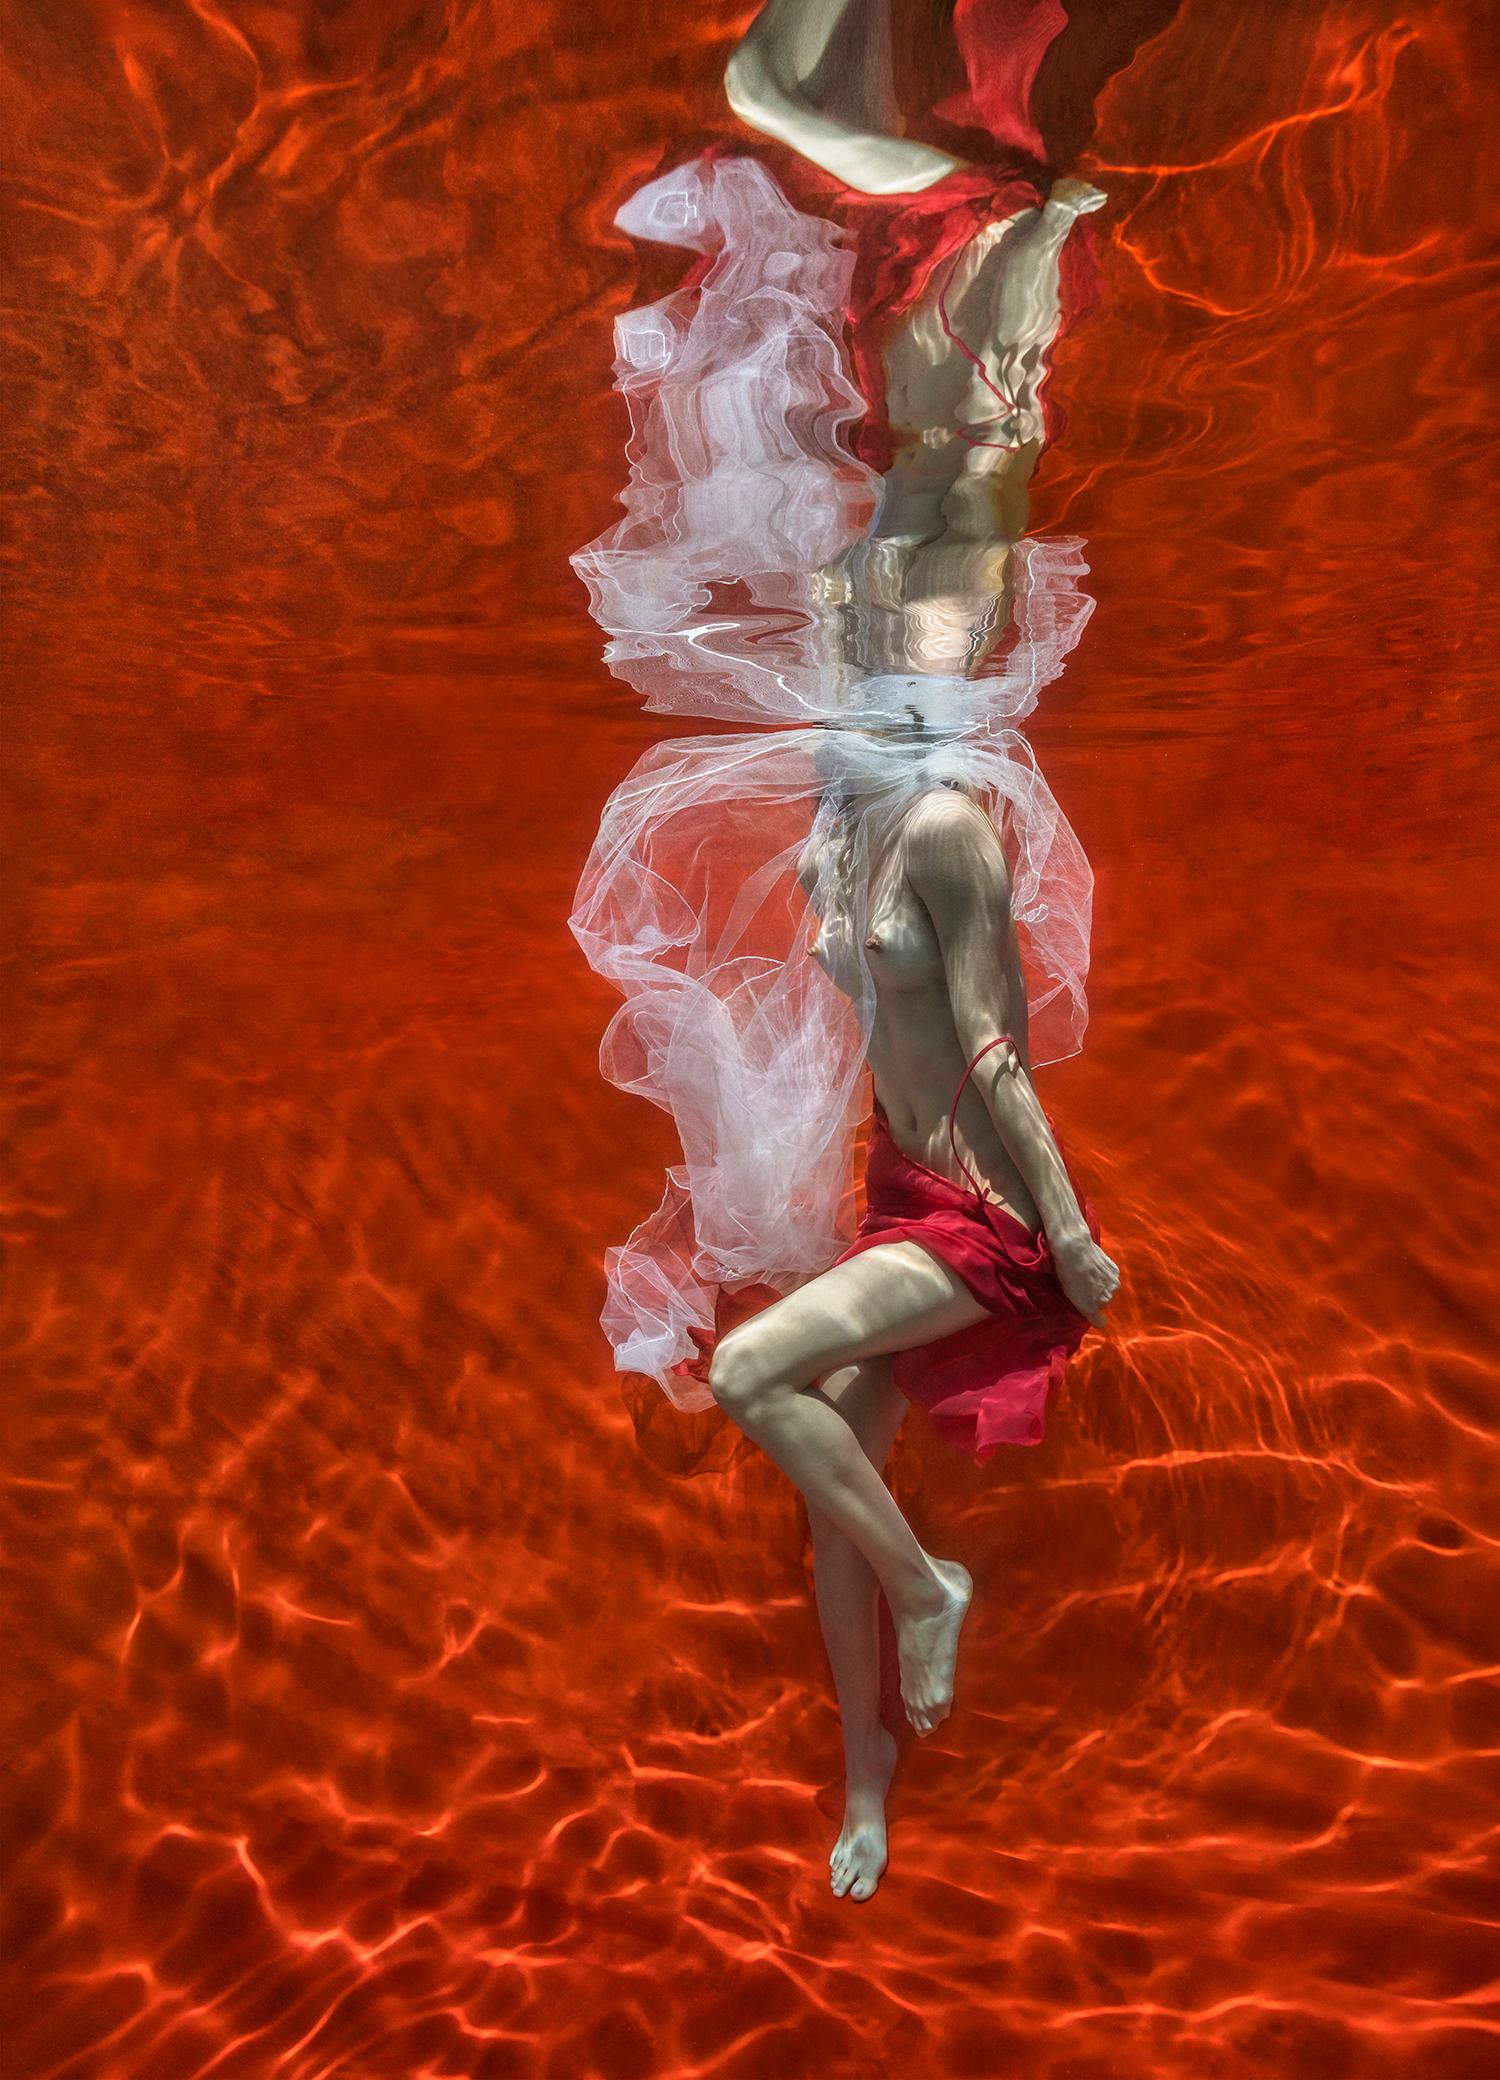 Blood and Milk III - underwater nude photograph - print on paper 35 x 25"